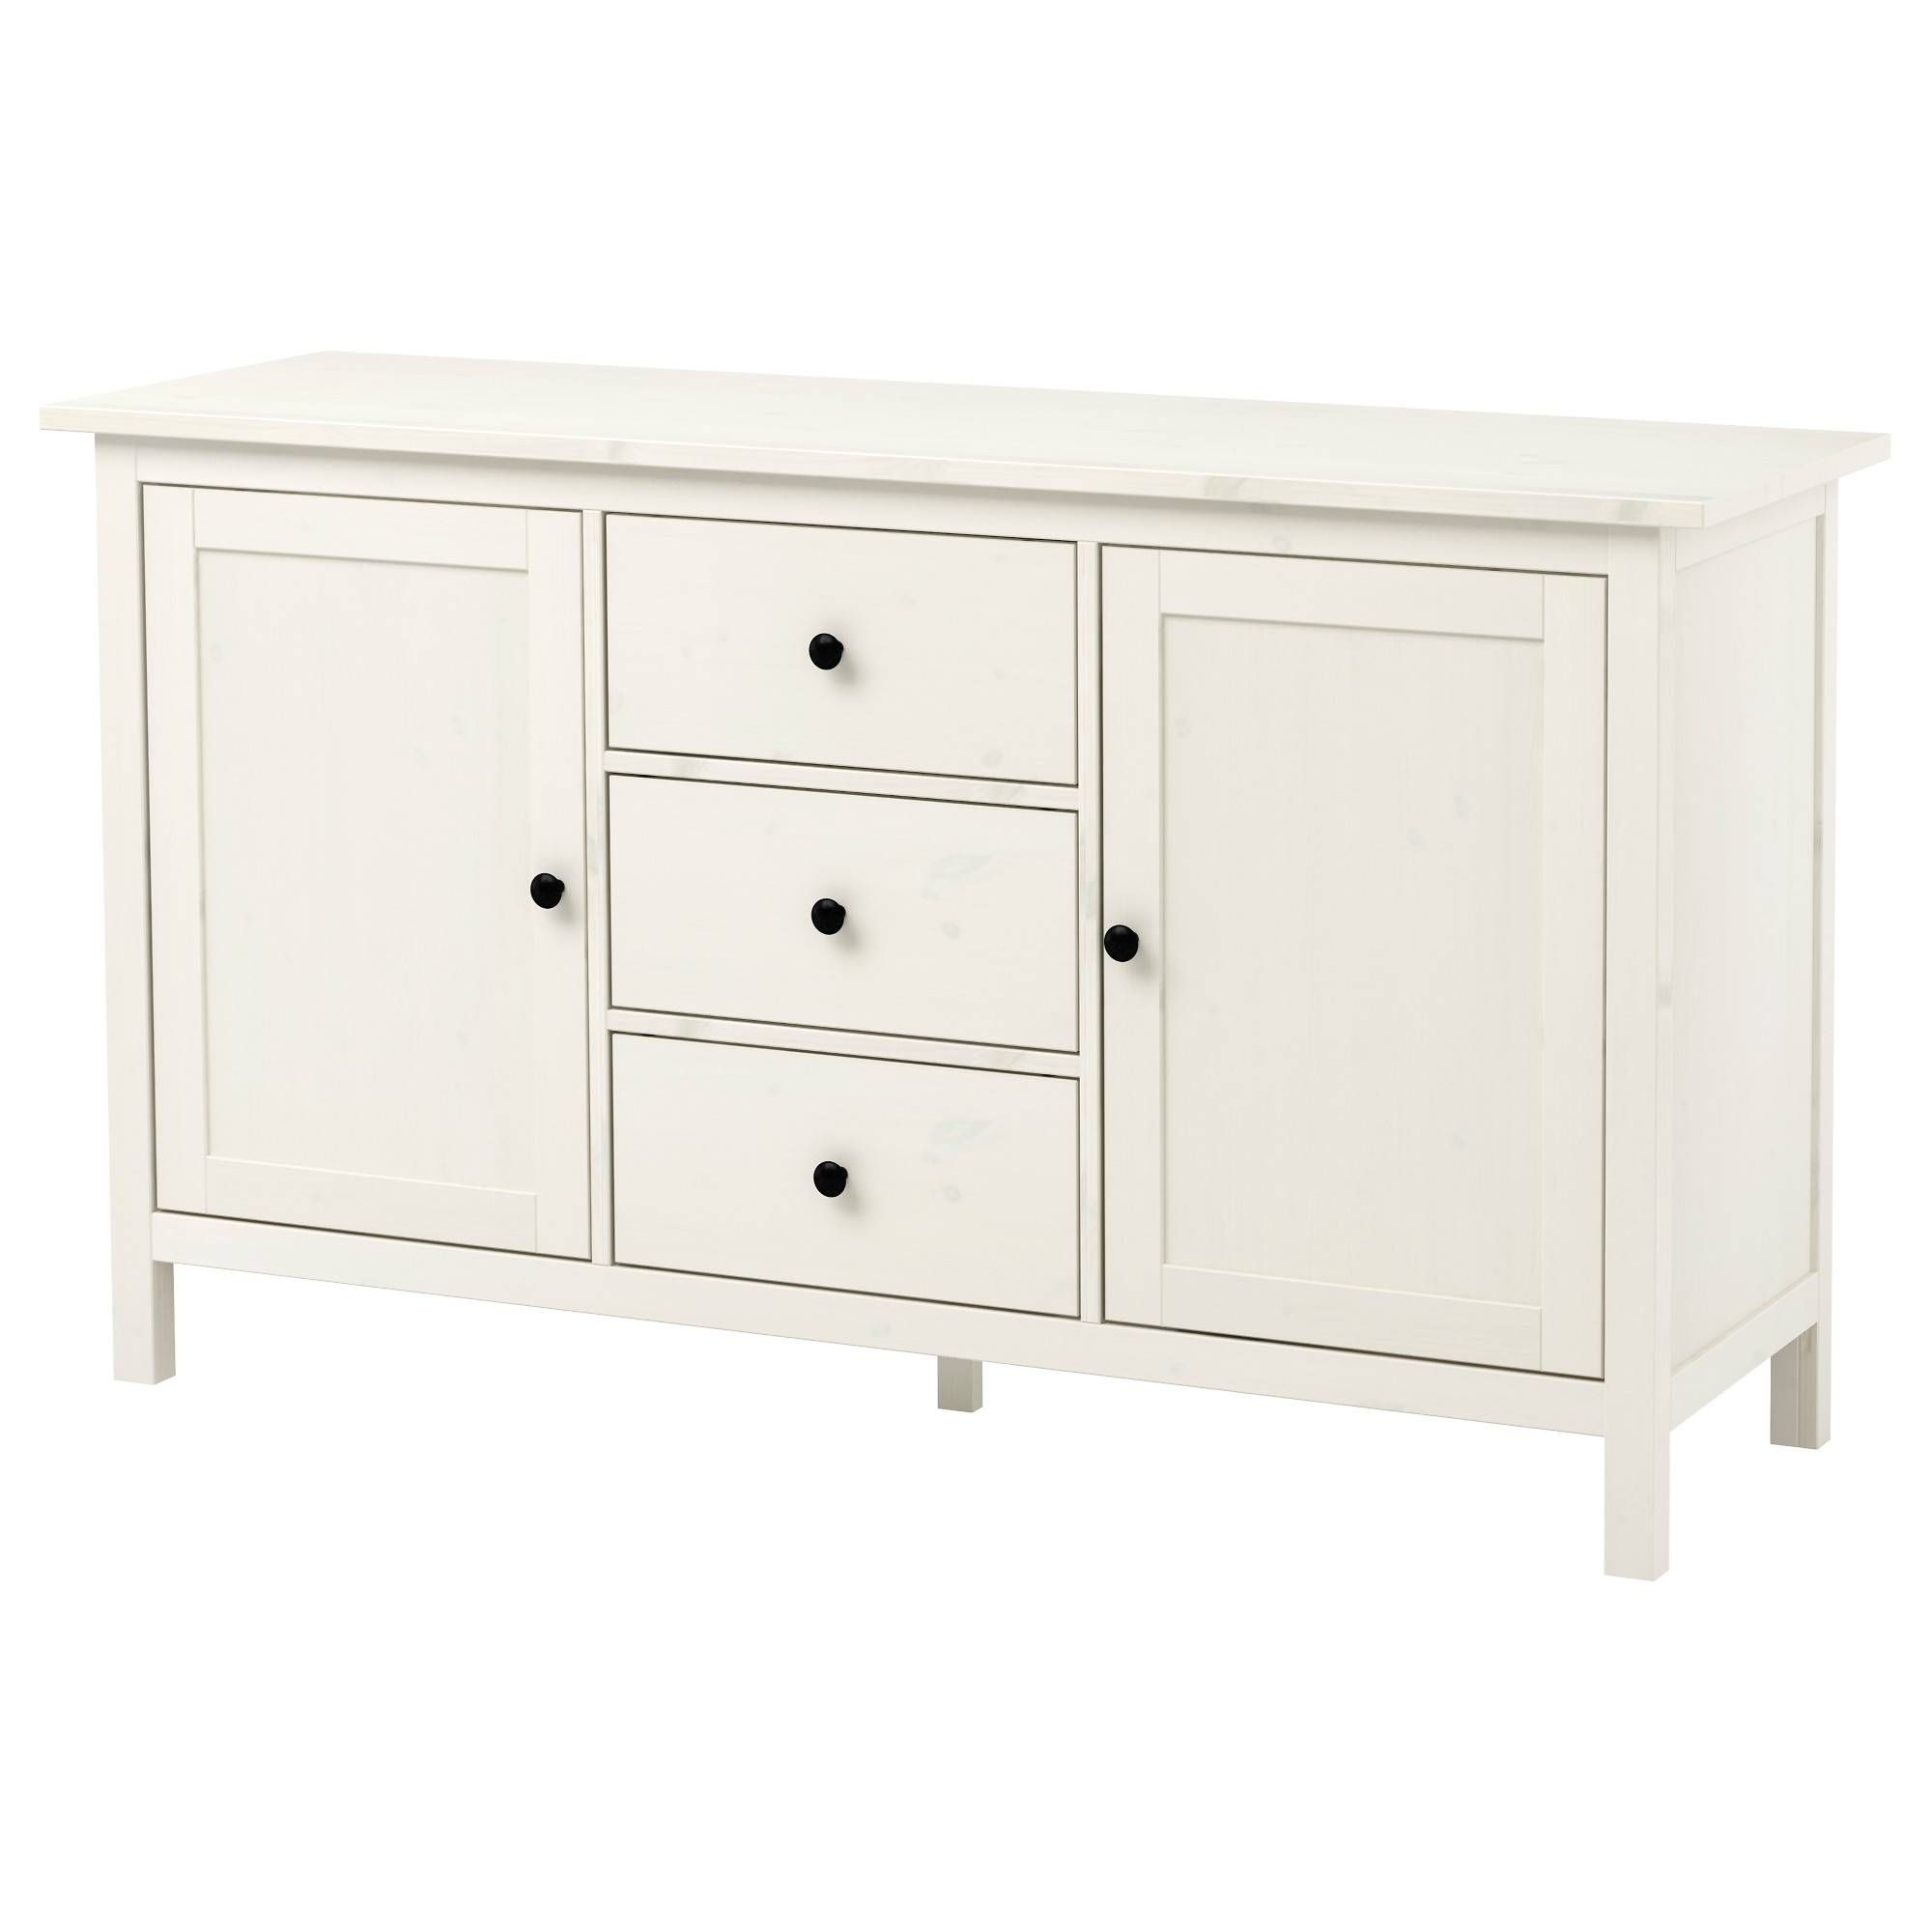 Hemnes Sideboard – White Stain – Ikea With Regard To Most Up To Date Sideboards With Drawers (View 2 of 15)